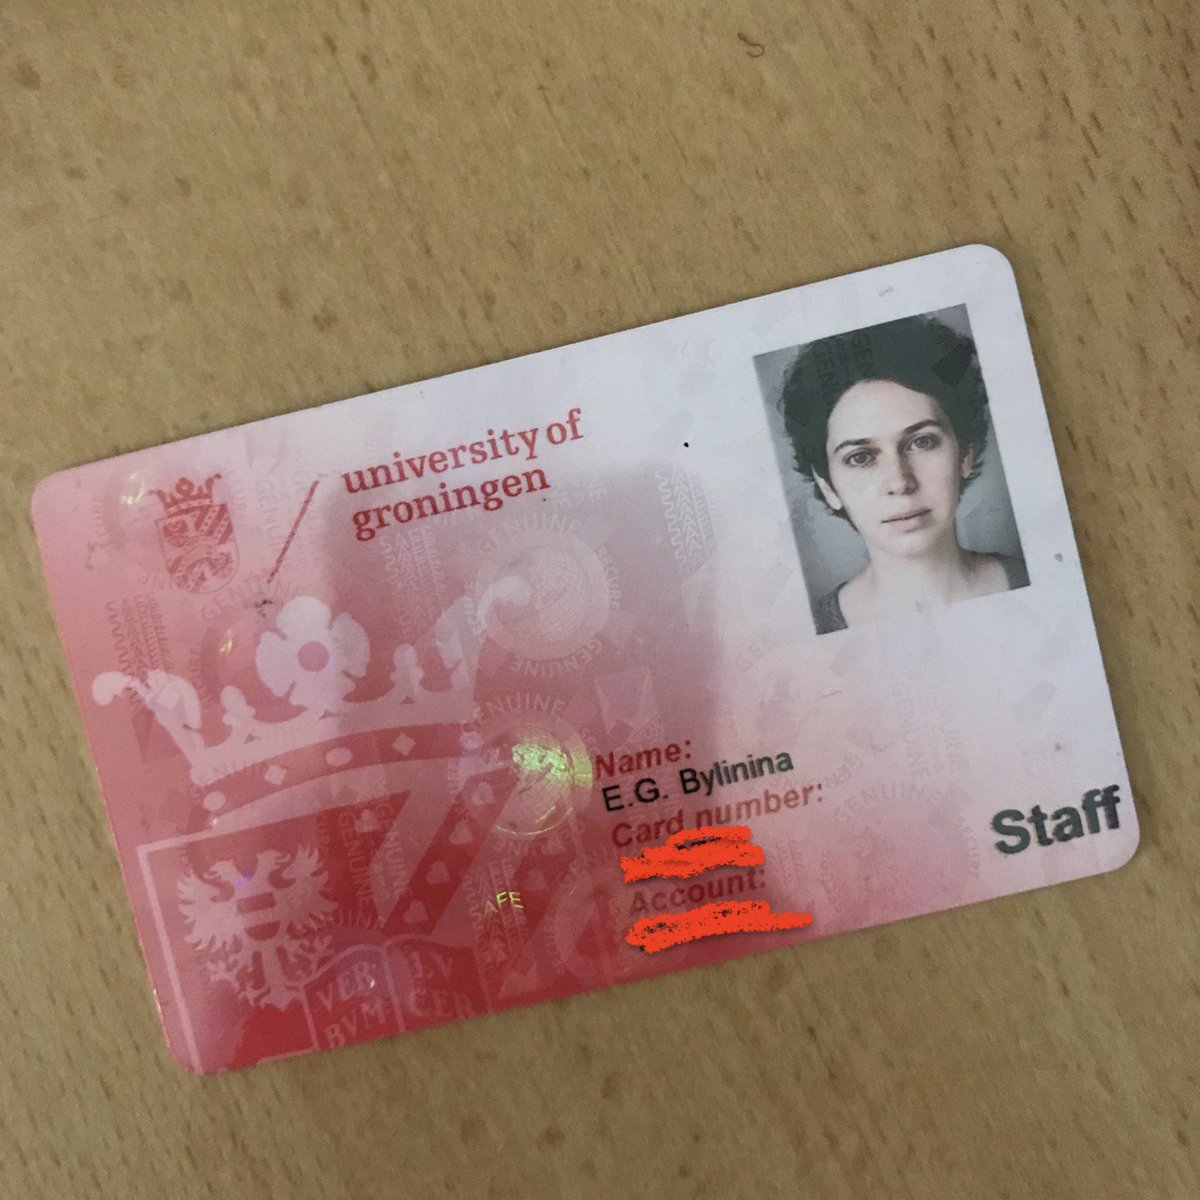 found my university card and it took me a second to remember how the easiest way for me to make a decent picture for the card was to fine-tune a stable diffusion model on a bunch of my photos and ask the model to make a passport photo of me 'well-rested' and 'with fresh haircut'